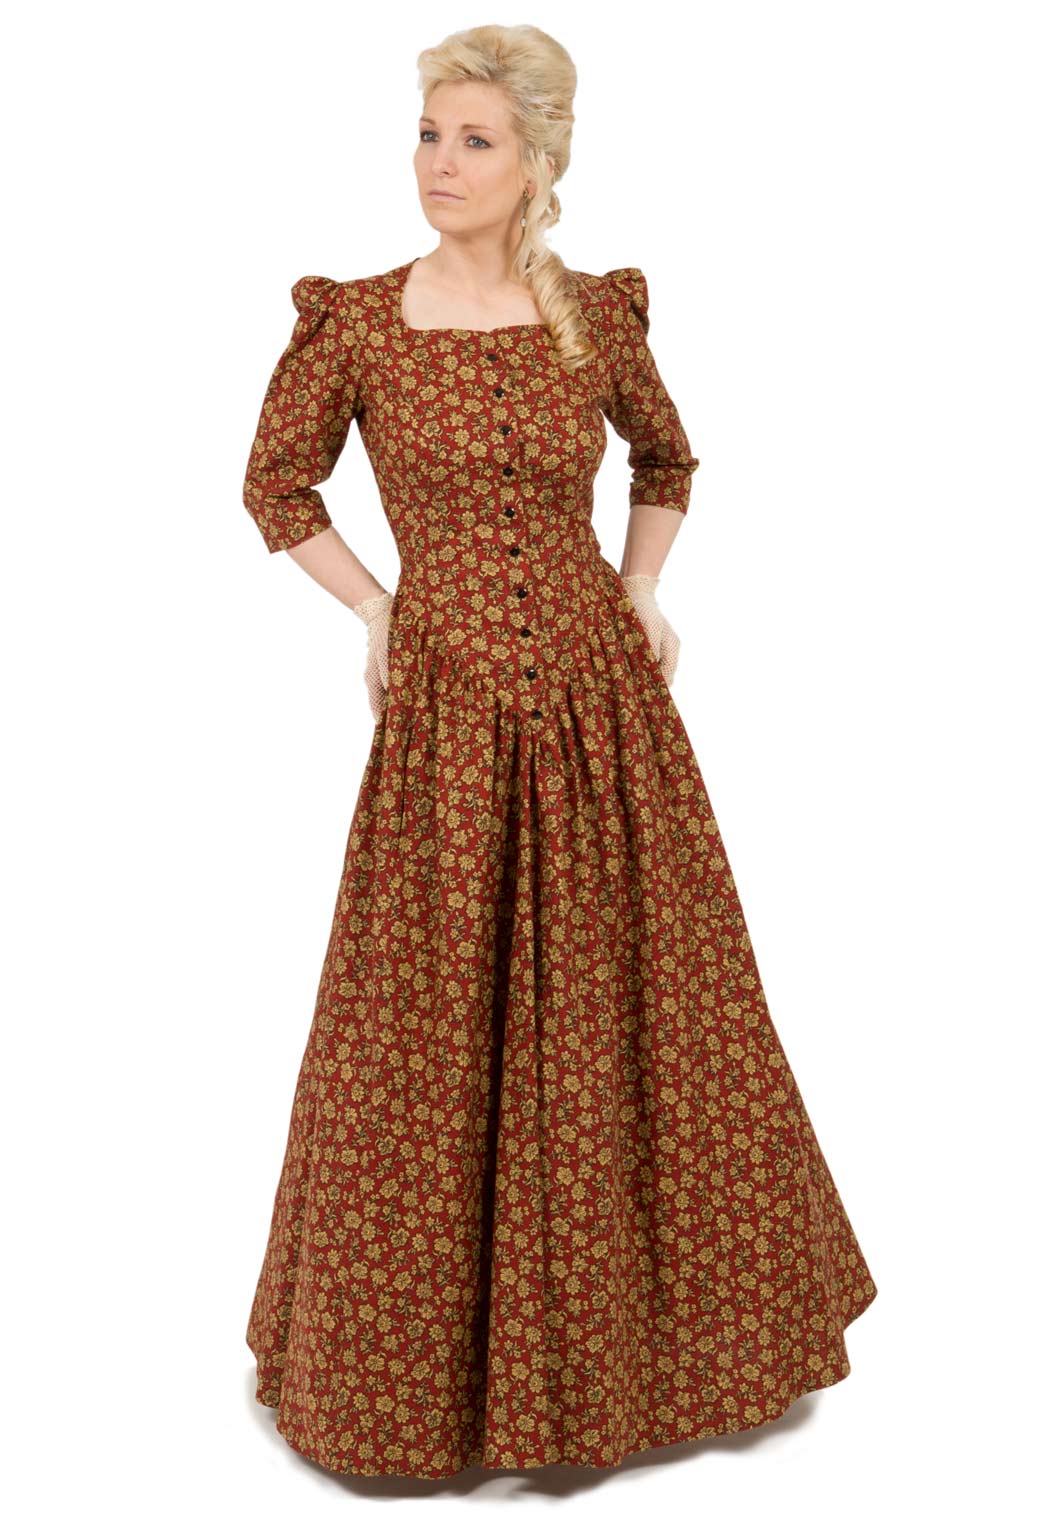 Margeaux Victorian Style  Prairie Dress  Recollections